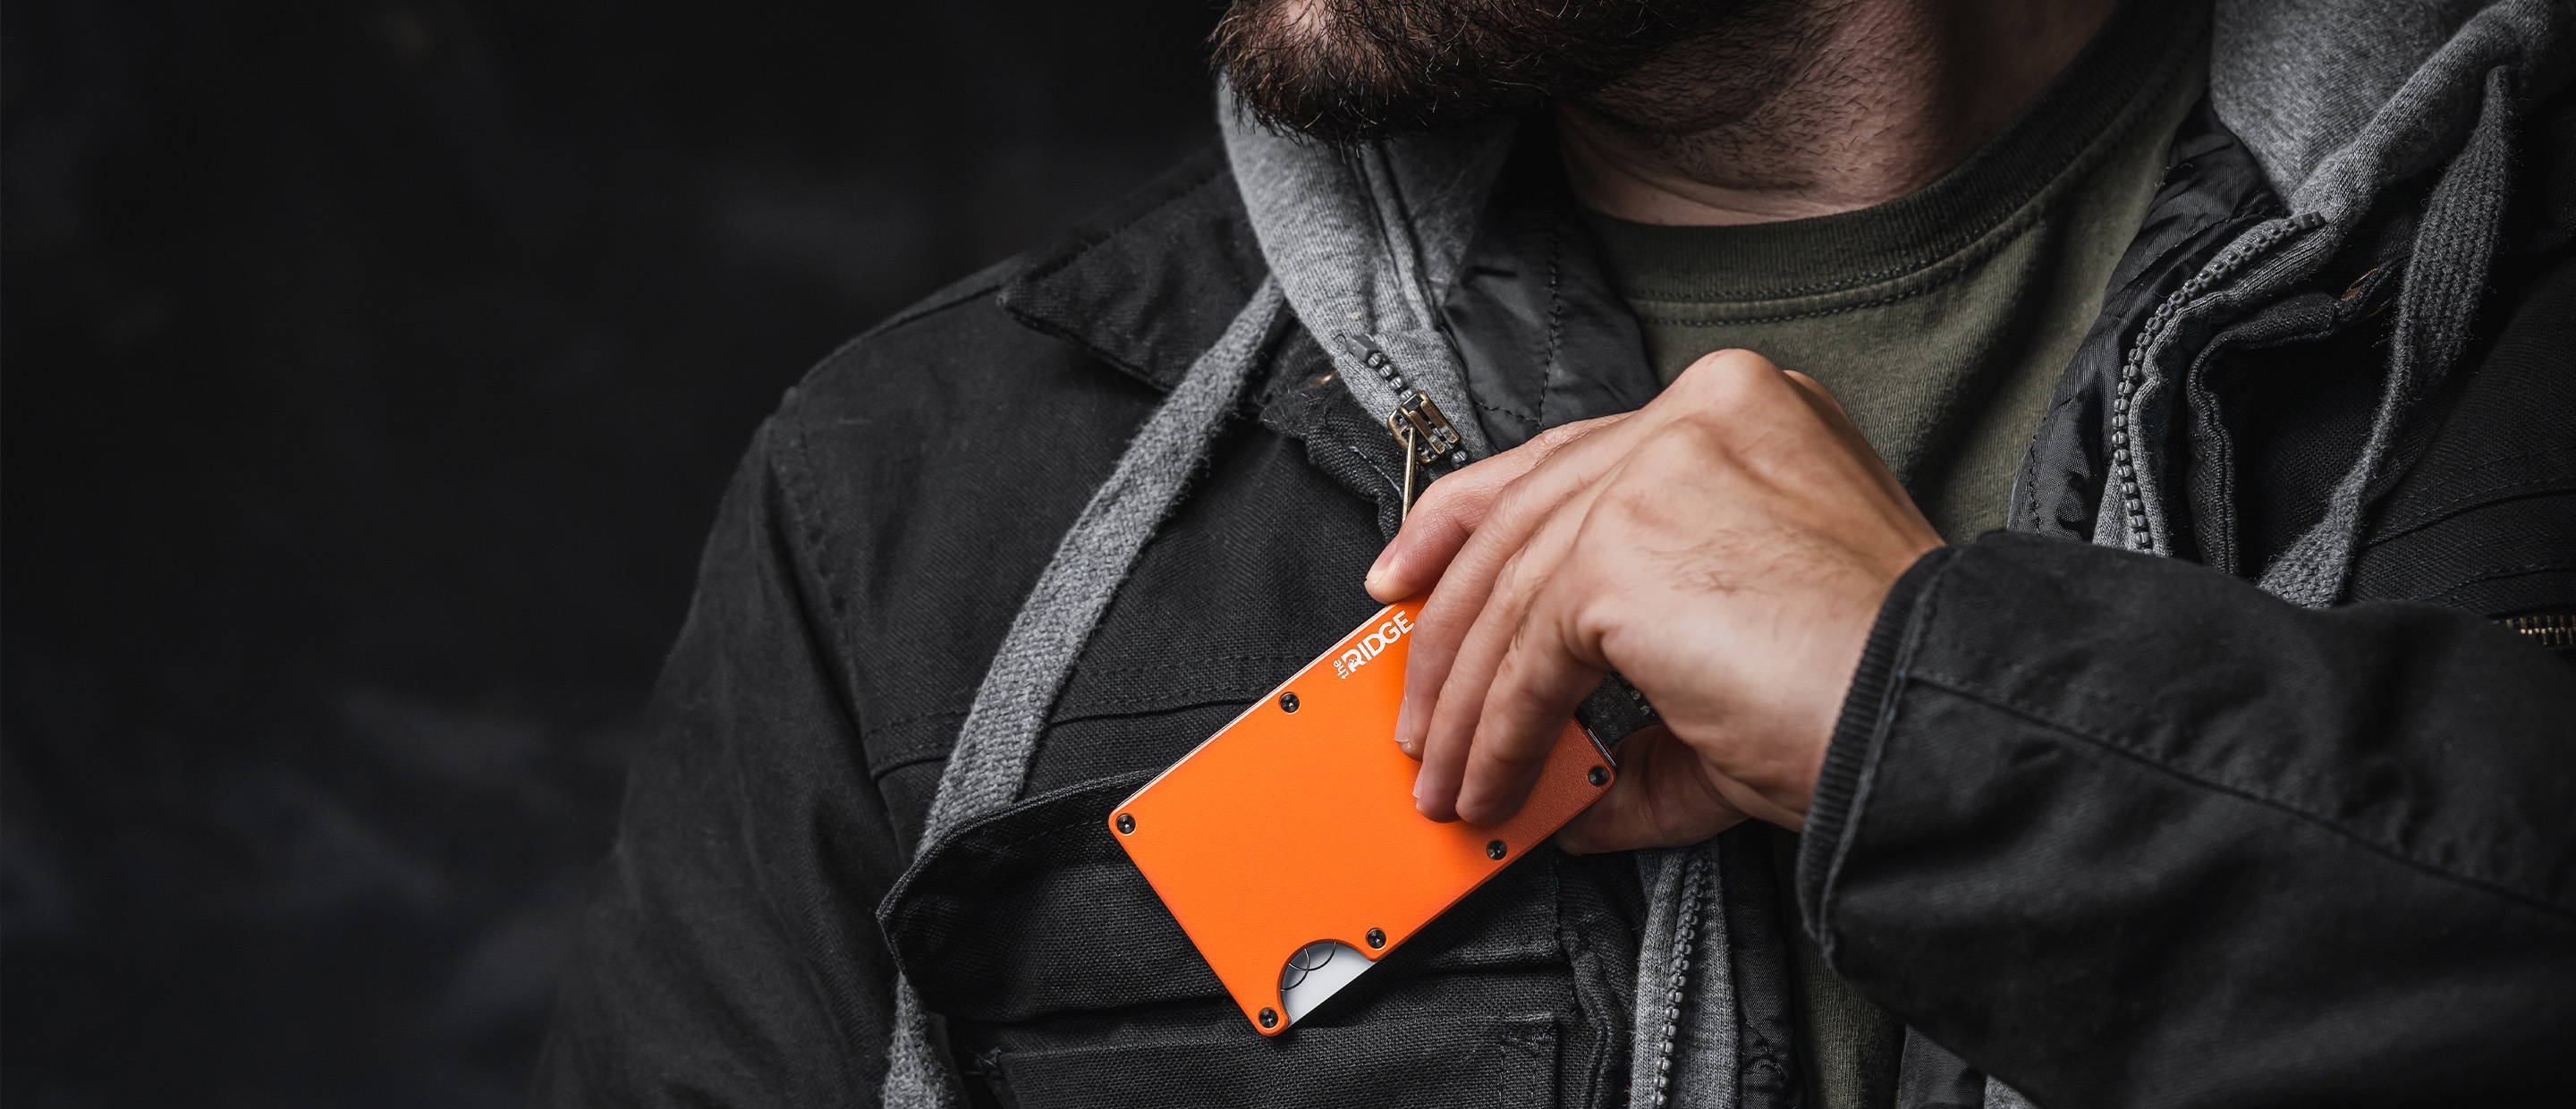 man holding a Basecamp Orange Ridge wallet in the chest